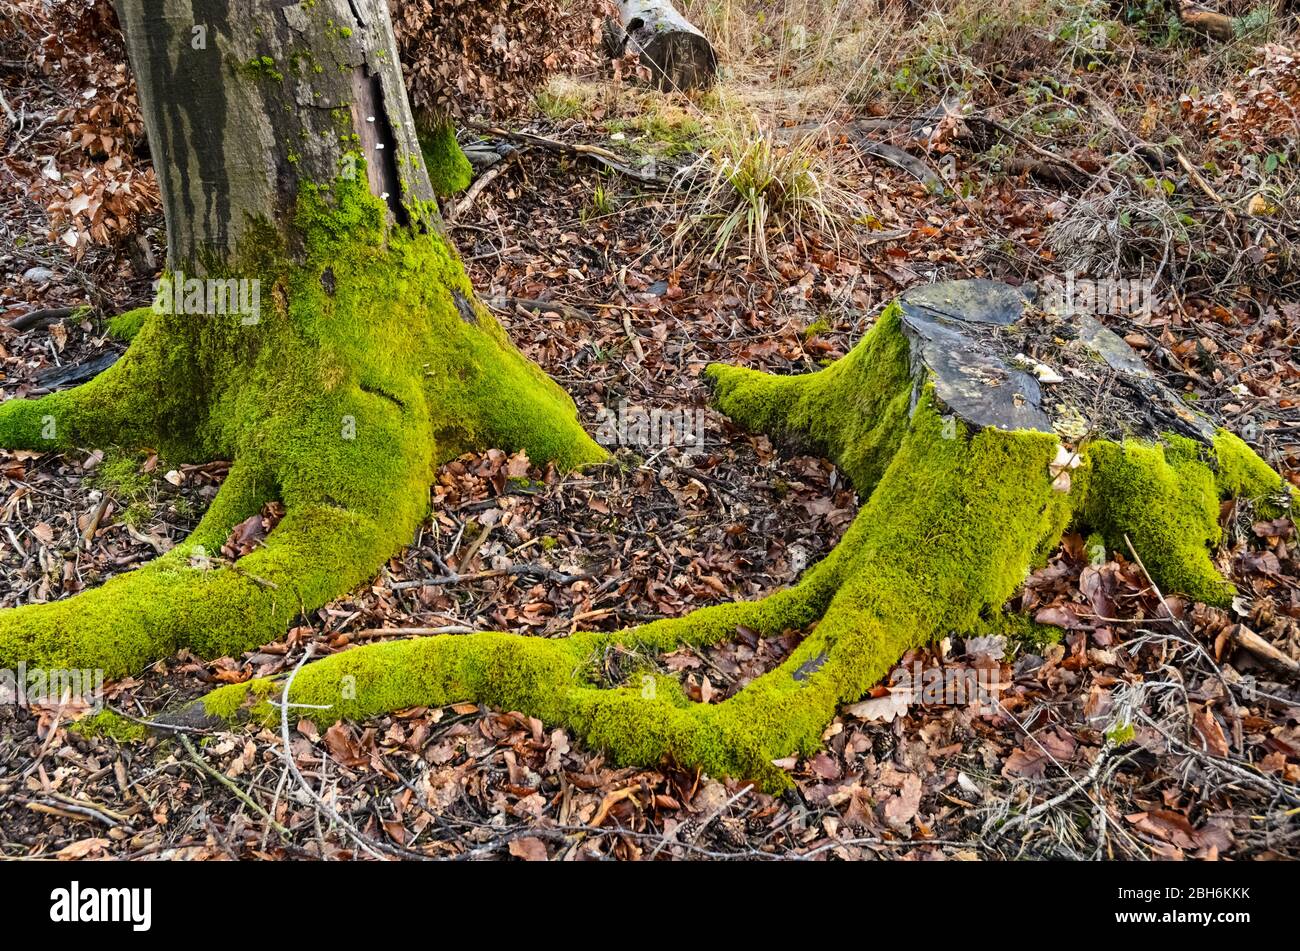 Moss plants, Bryophyta, on a tree trunk in the forest in Rhineland-Palatinate, Germany, Western Europe Stock Photo